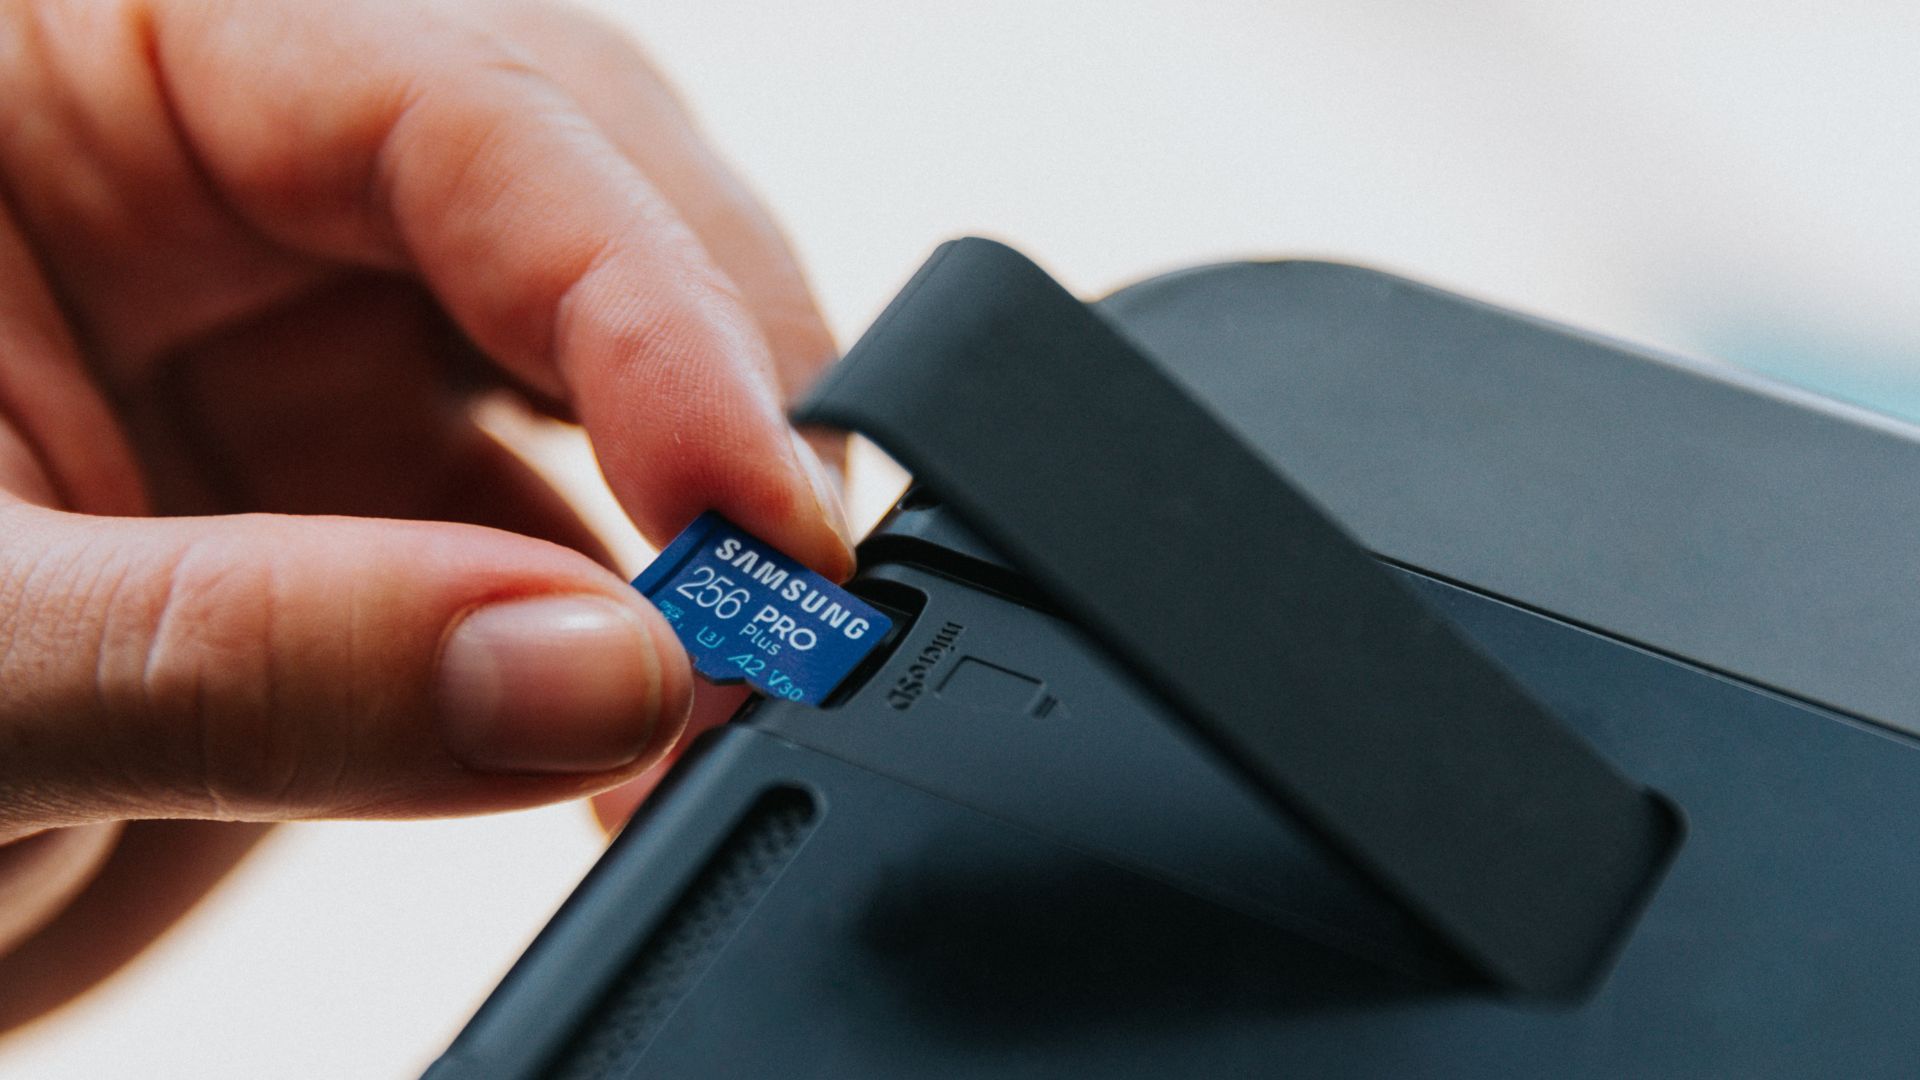 hand inserting a Samsung Pro Plus SD card into a Nintendo Switch